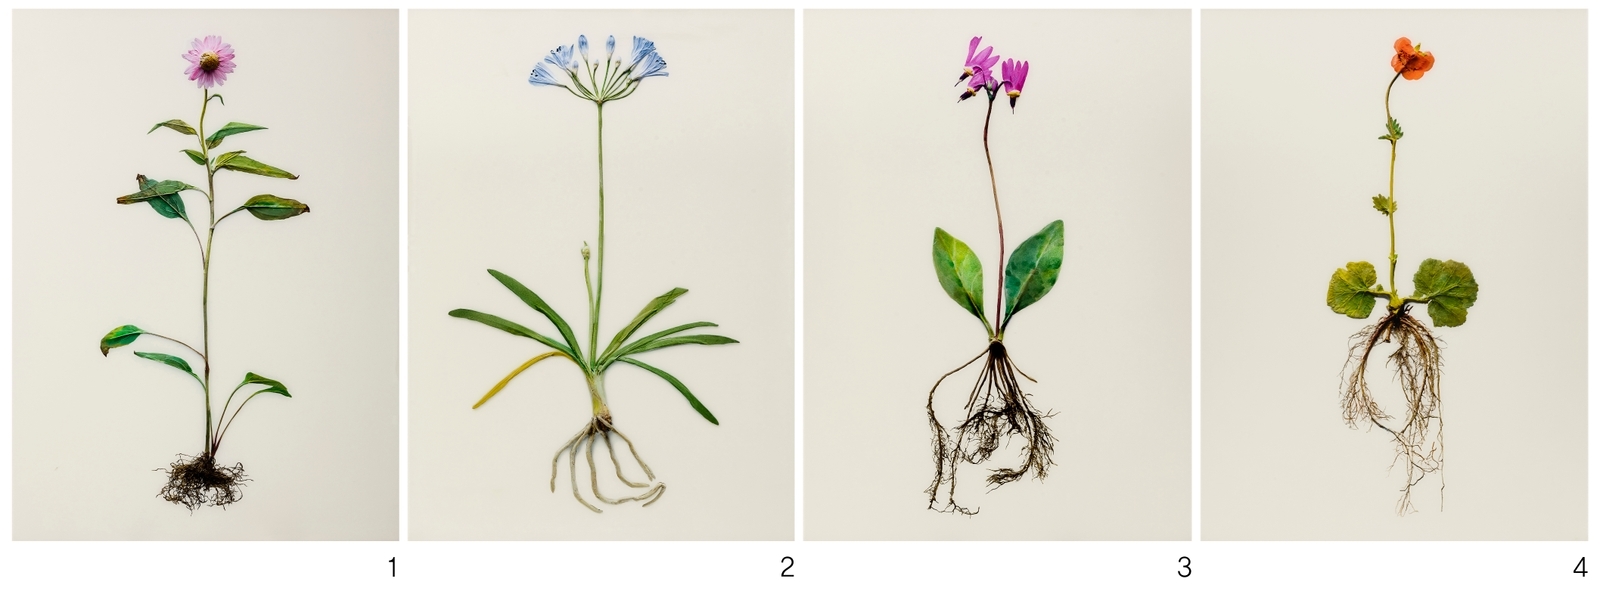 Photogenic Drawing - Echinacea, African Lily, Shooting Star, Geum 2 by Koo Sung Soo, 2011